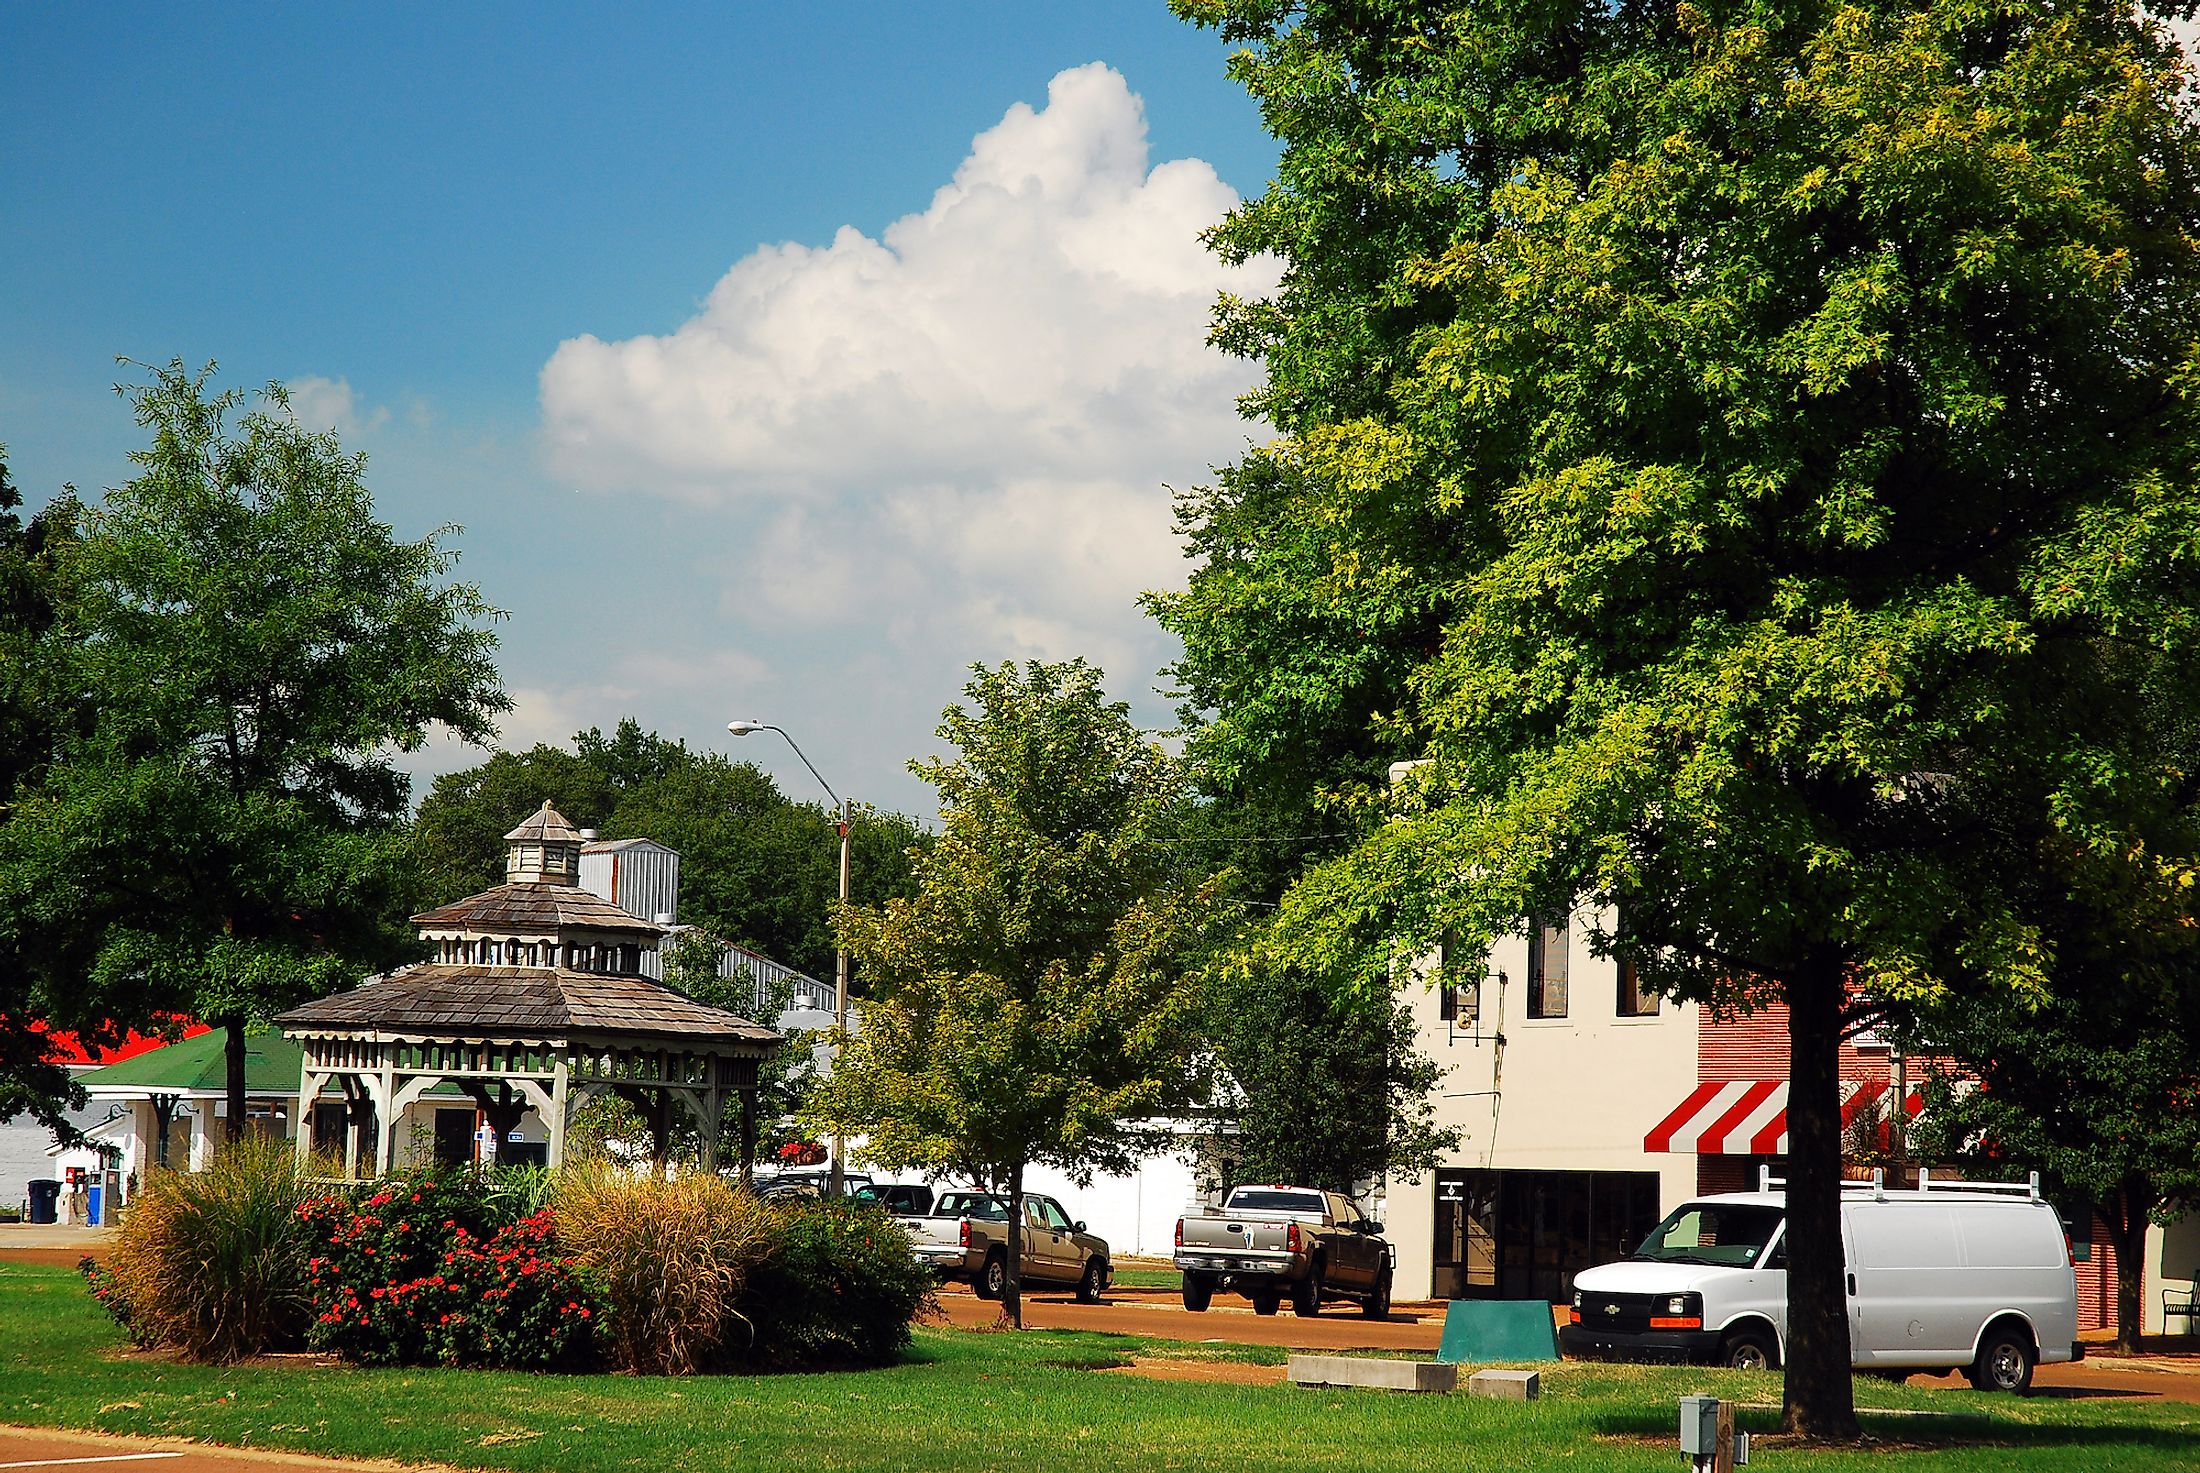 A gazebo sits in the center of the town square of downtown Tunica, Mississippi. Editorial credit: James Kirkikis / Shutterstock.com